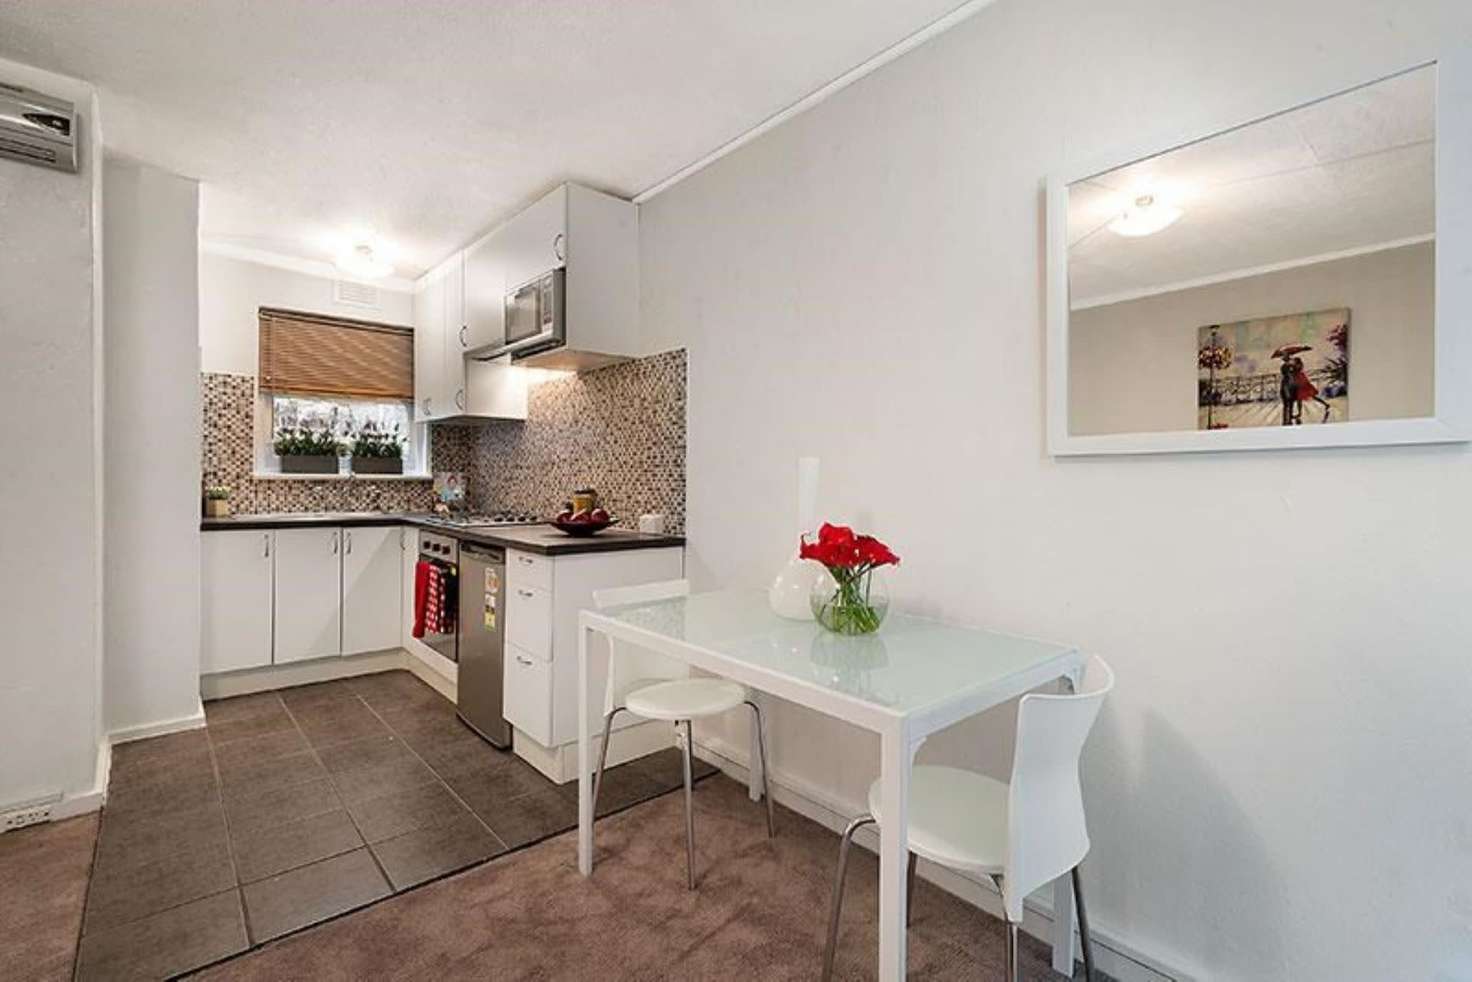 Main view of Homely apartment listing, 2/38 Dalgety, St Kilda VIC 3182